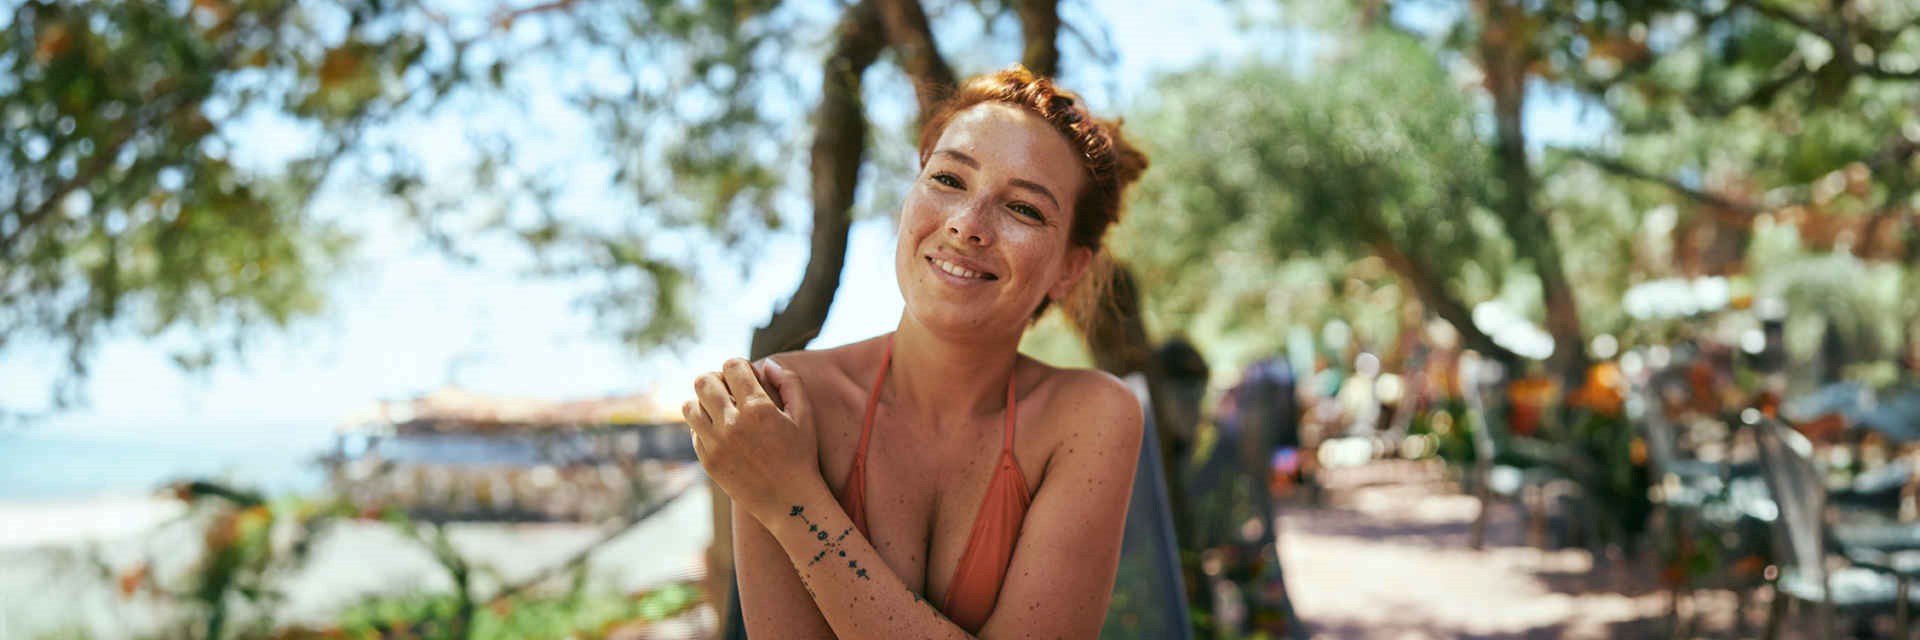 Woman with freckles in the sunshine